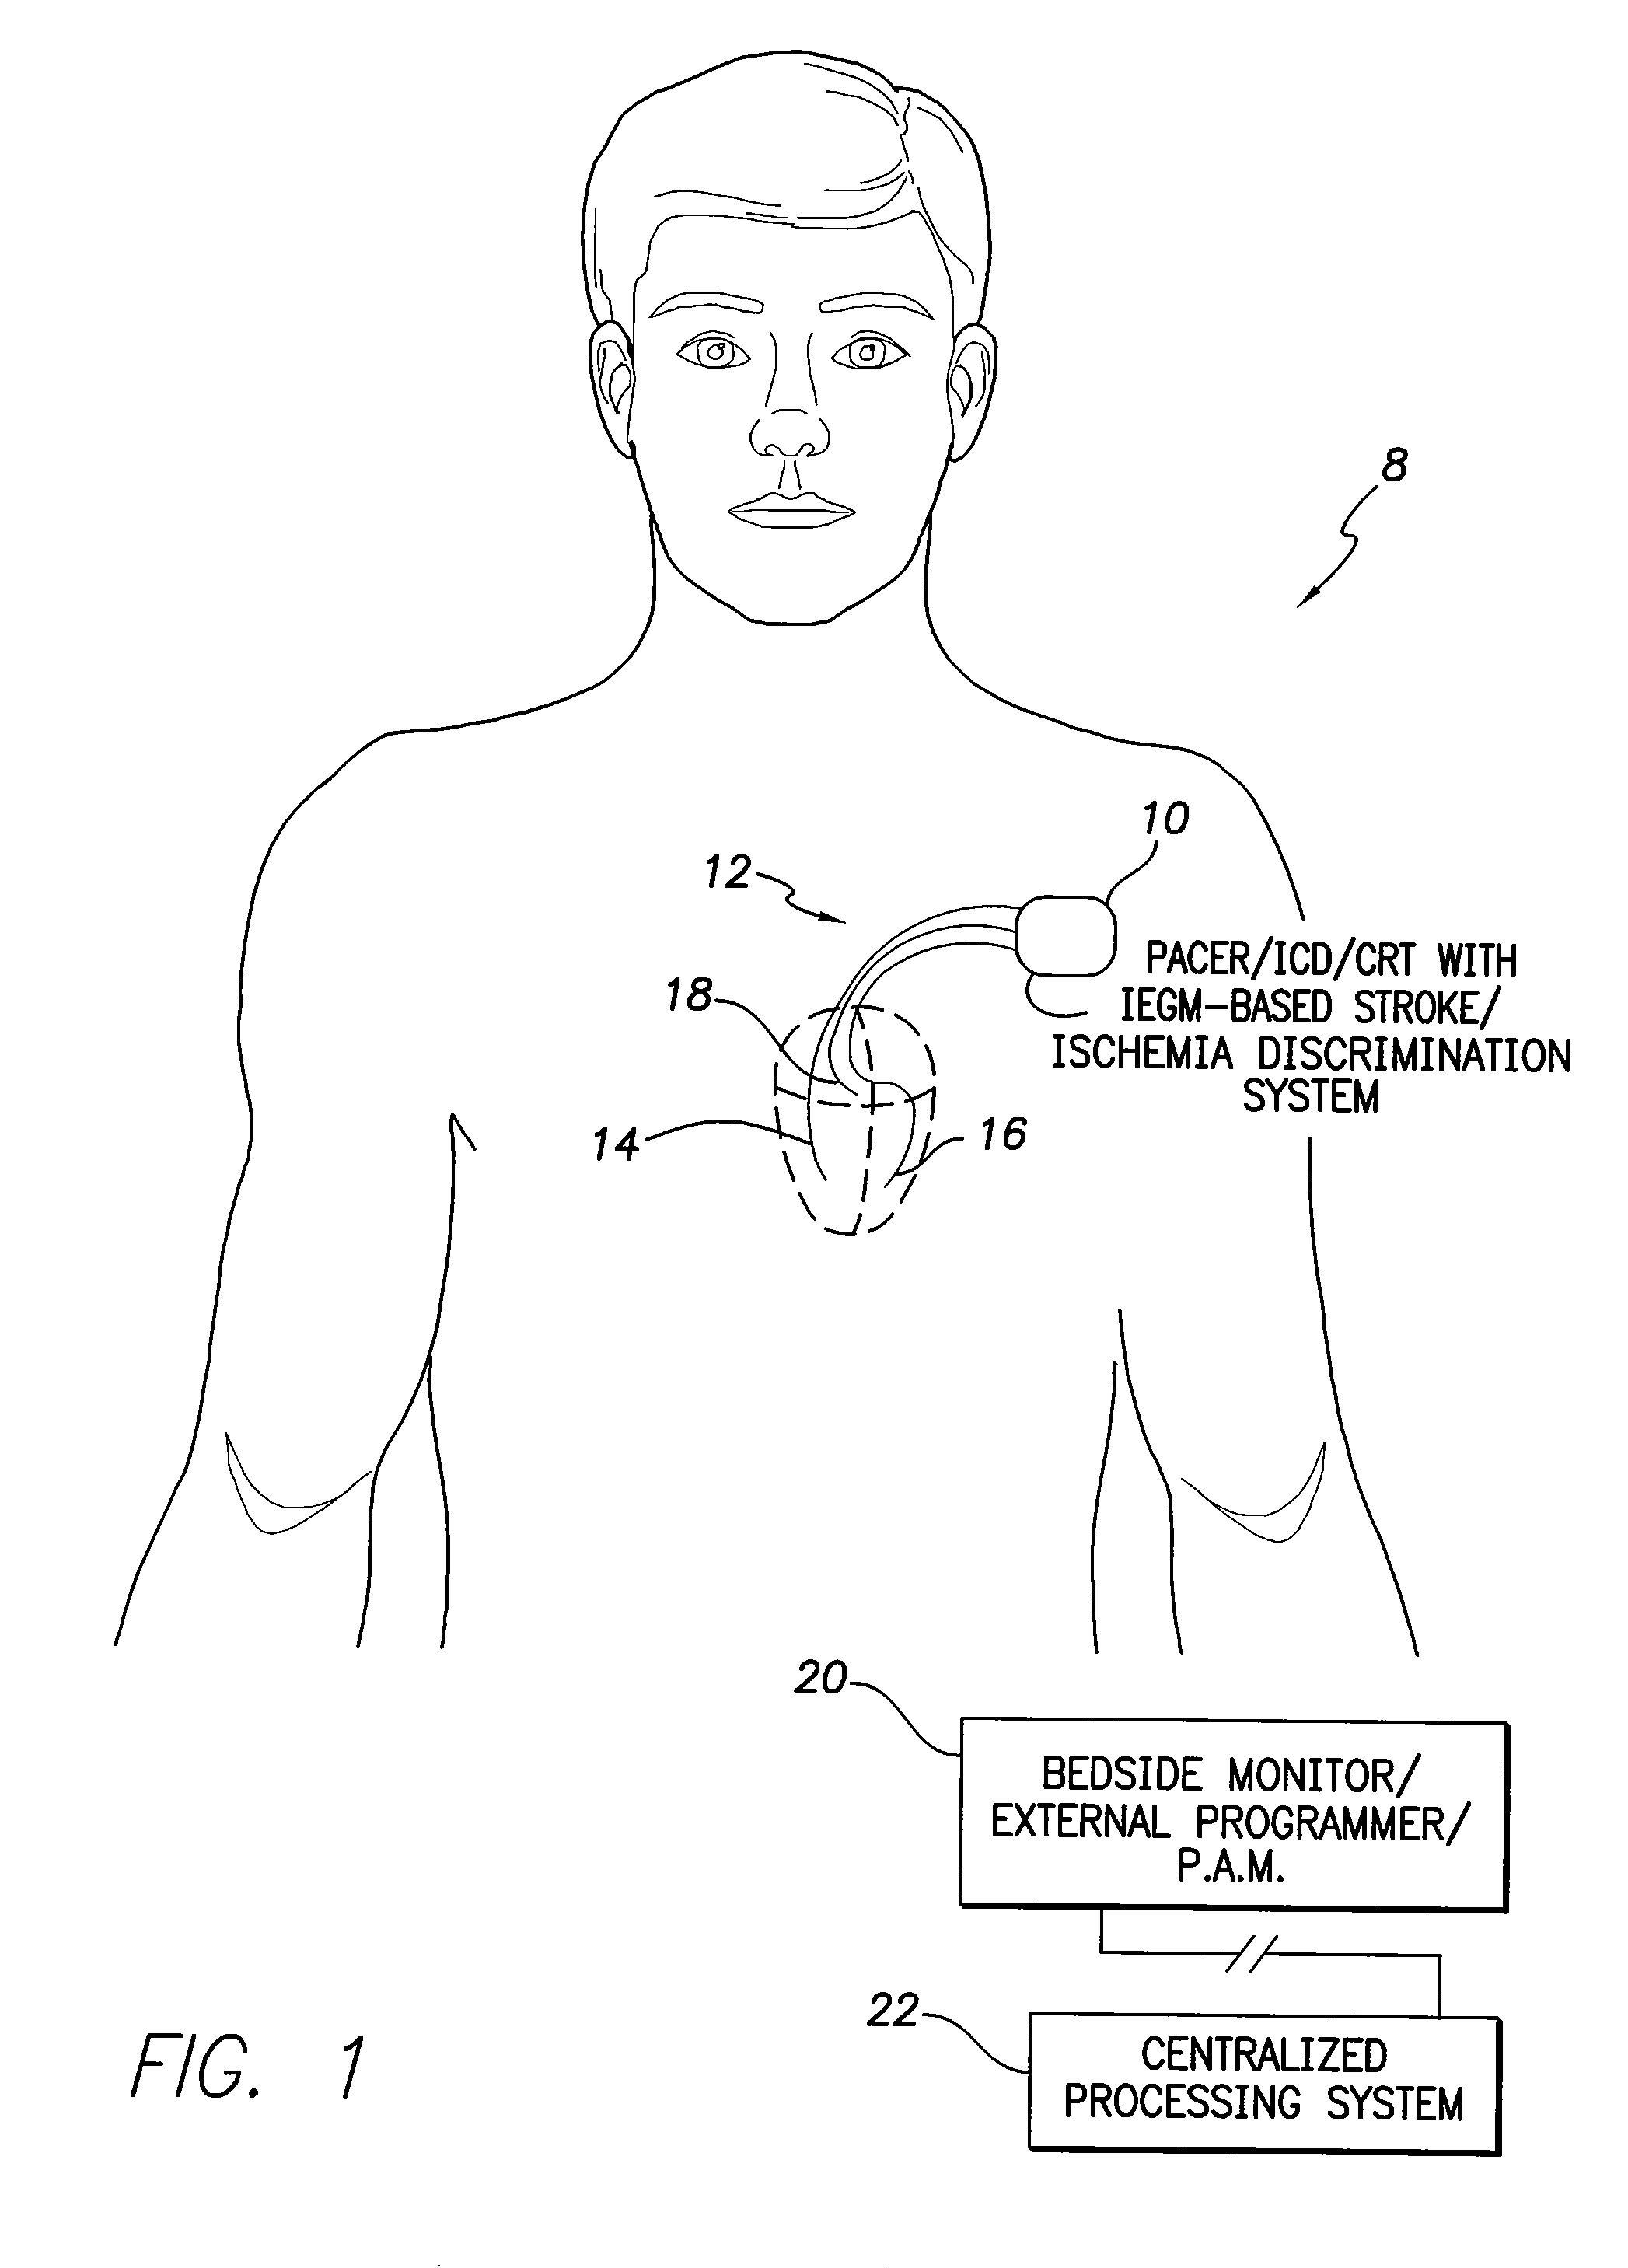 Systems and methods for use by implantable medical devices for detecting and discriminating stroke and cardiac ischemia using electrocardiac signals